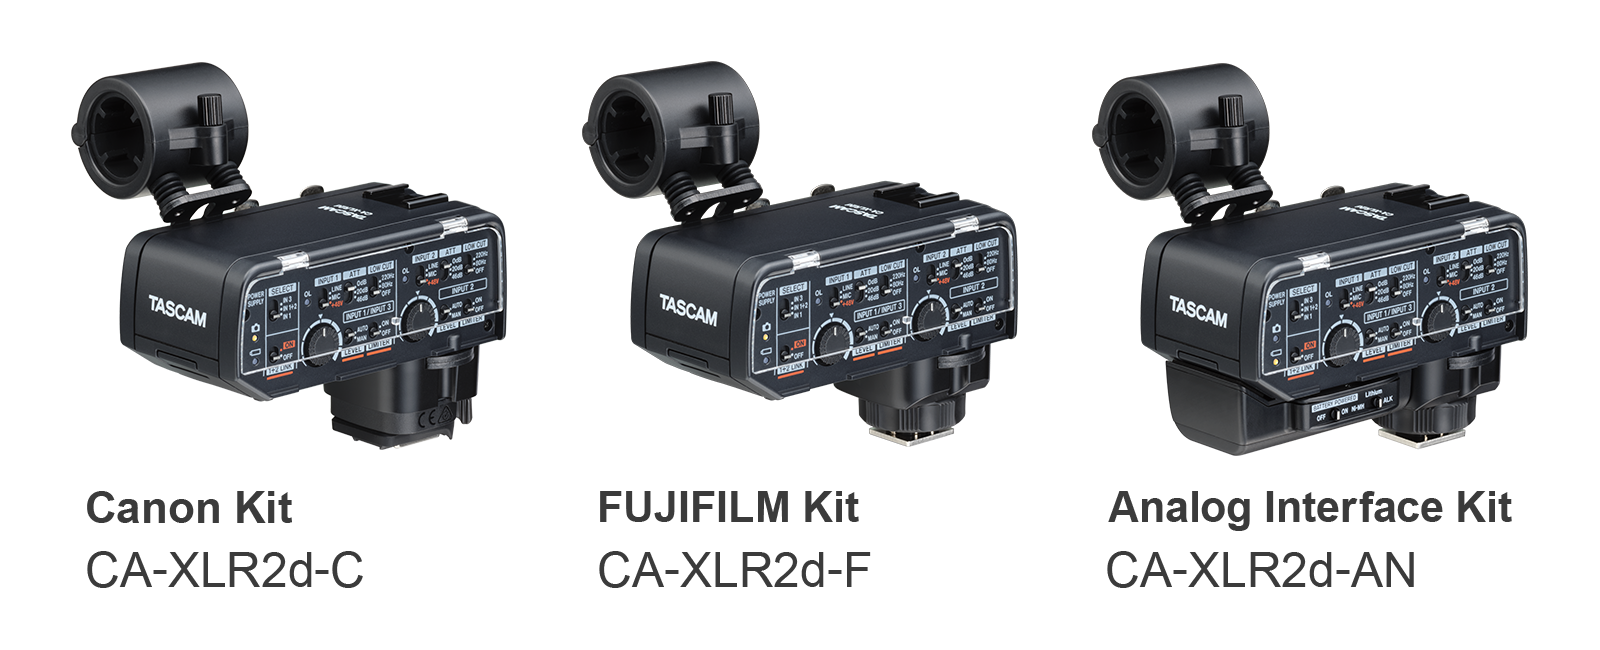 Development of new TASCAM XLR audio adapter allows mirrorless cameras in collaboration with Canon, F